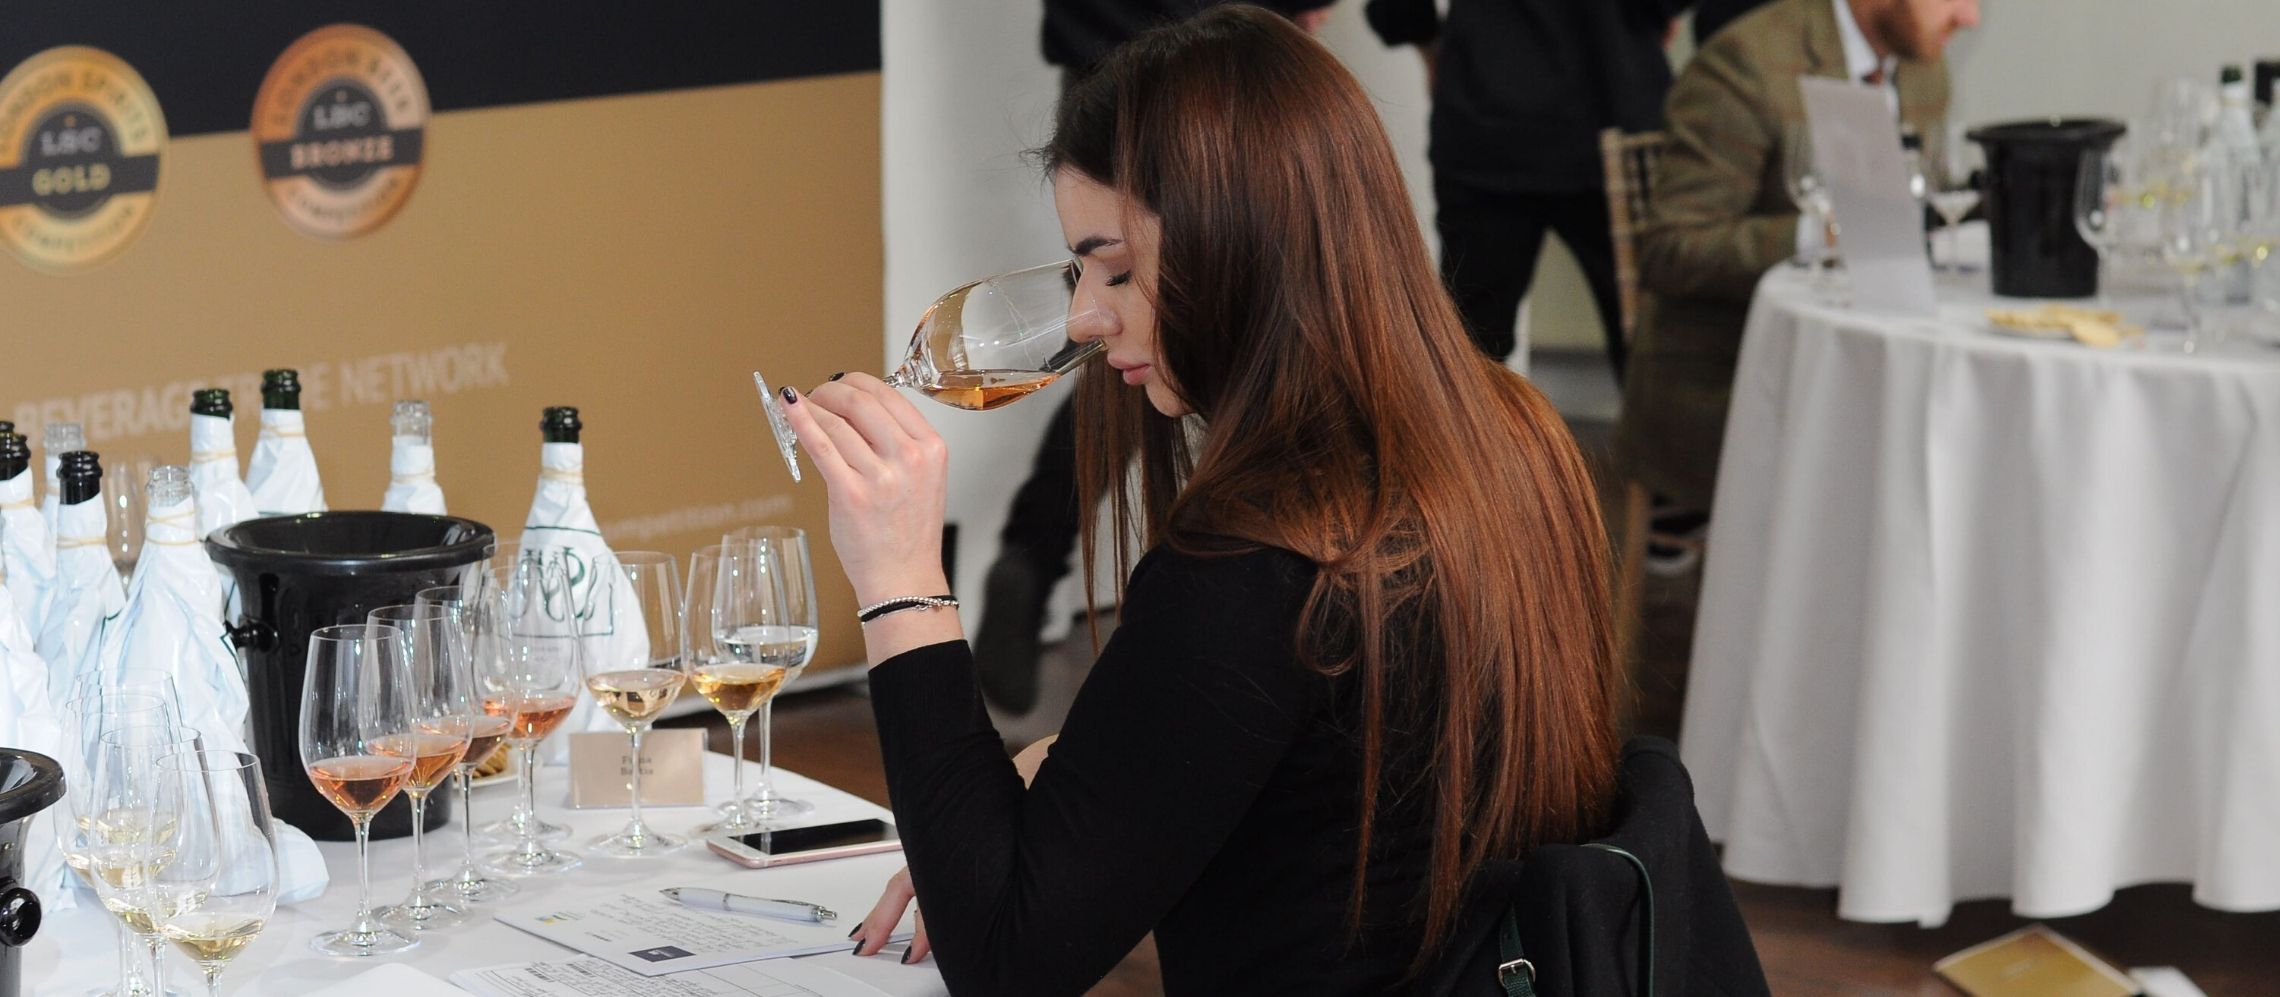 Photo for: The Smashing 3rd Edition of London Wine Competition